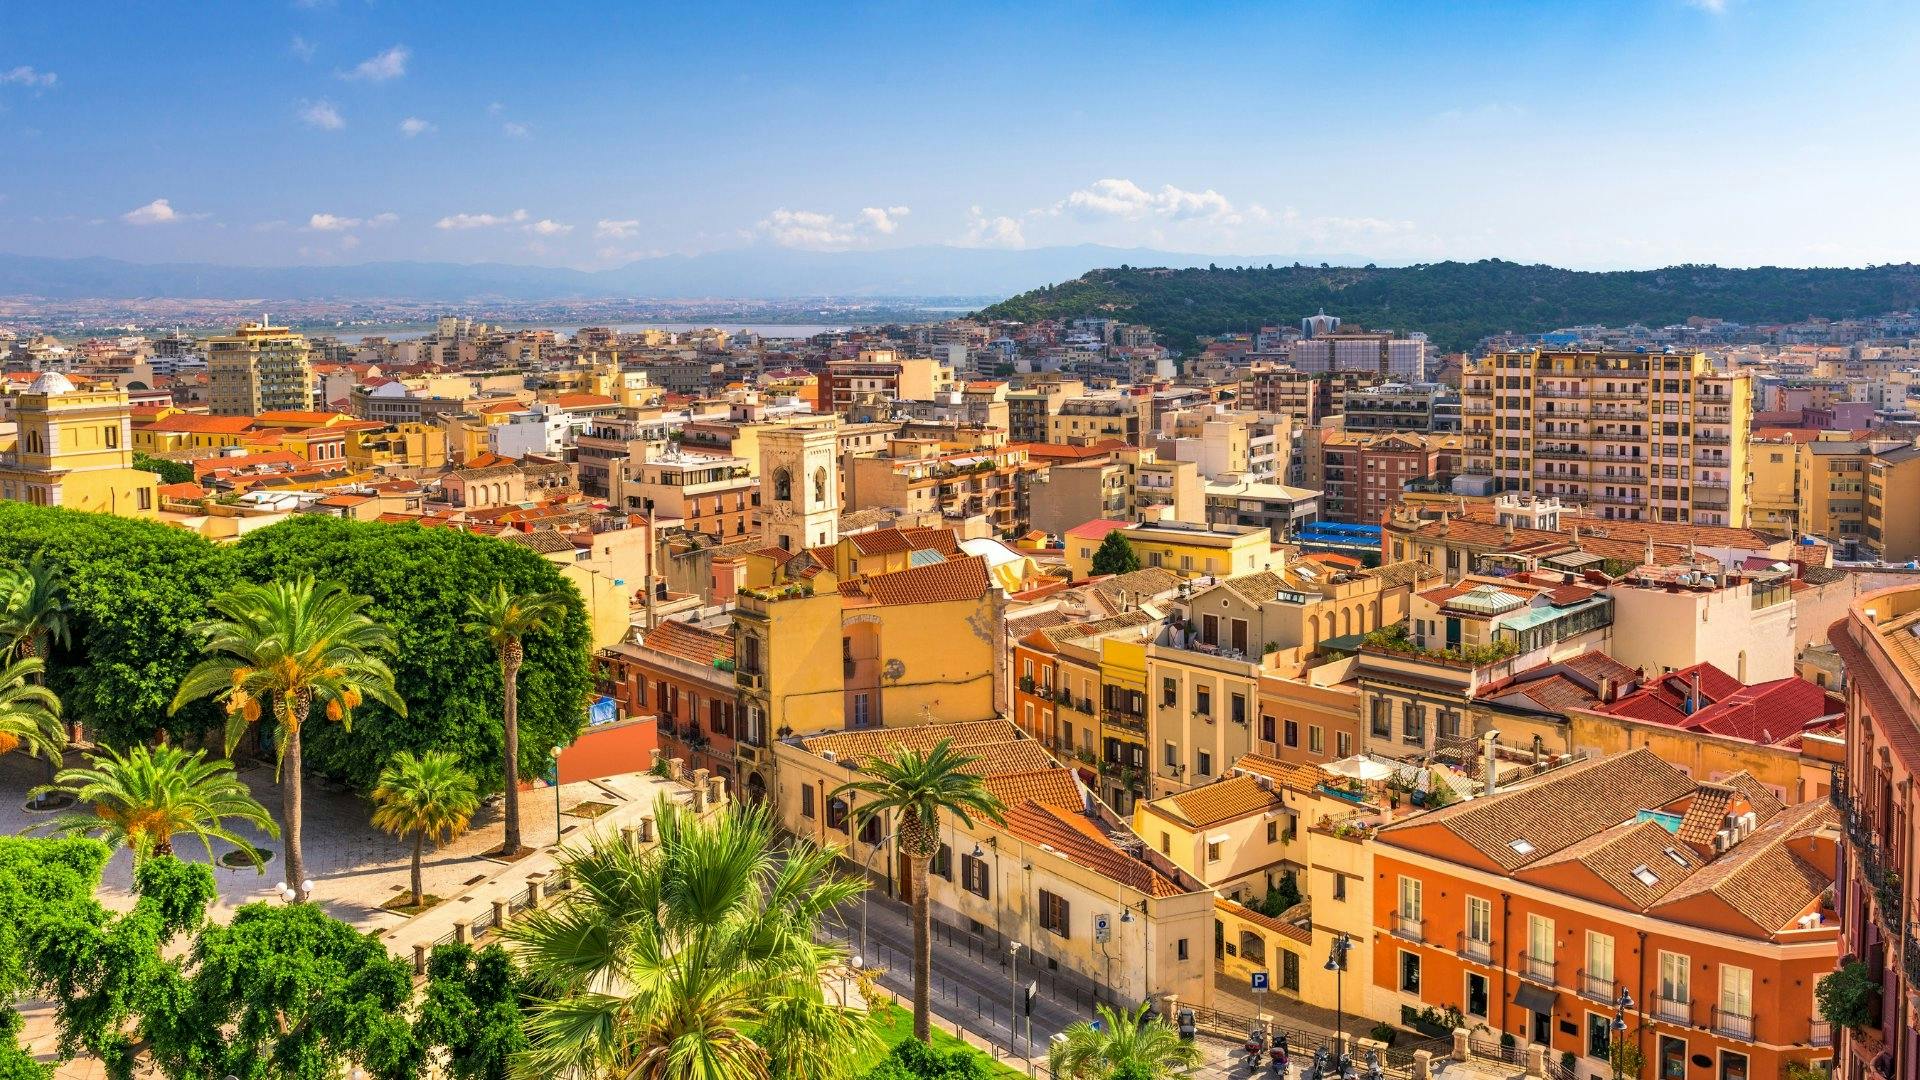 Cagliari's historic centre tour with National Archaeological Museum